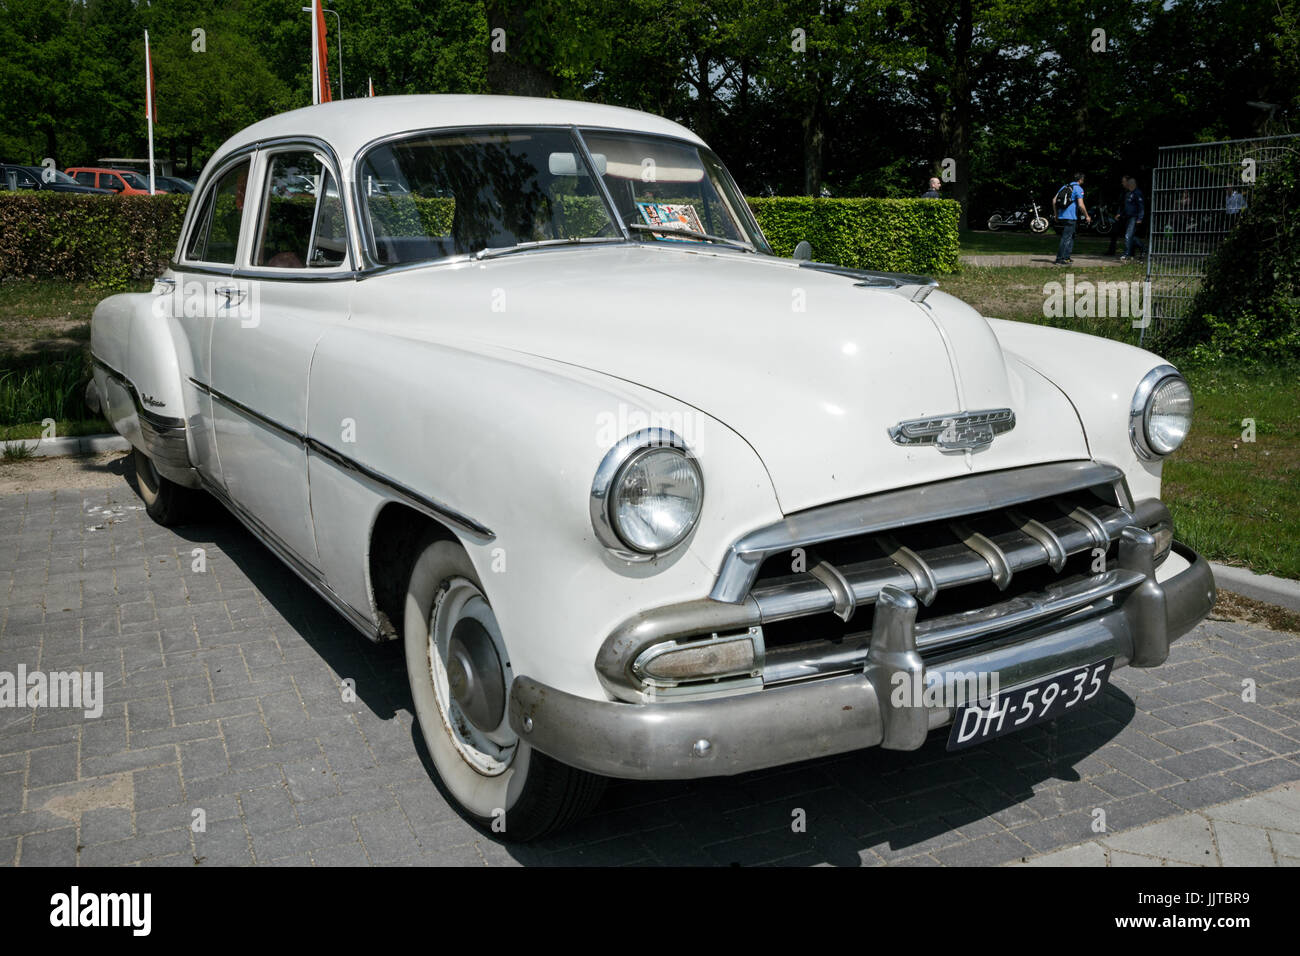 DEN BOSCH, THE NETHERLANDS - MAY 10, 2015: White 1952 Chevrolet Styleline Deluxe classic car. Stock Photo